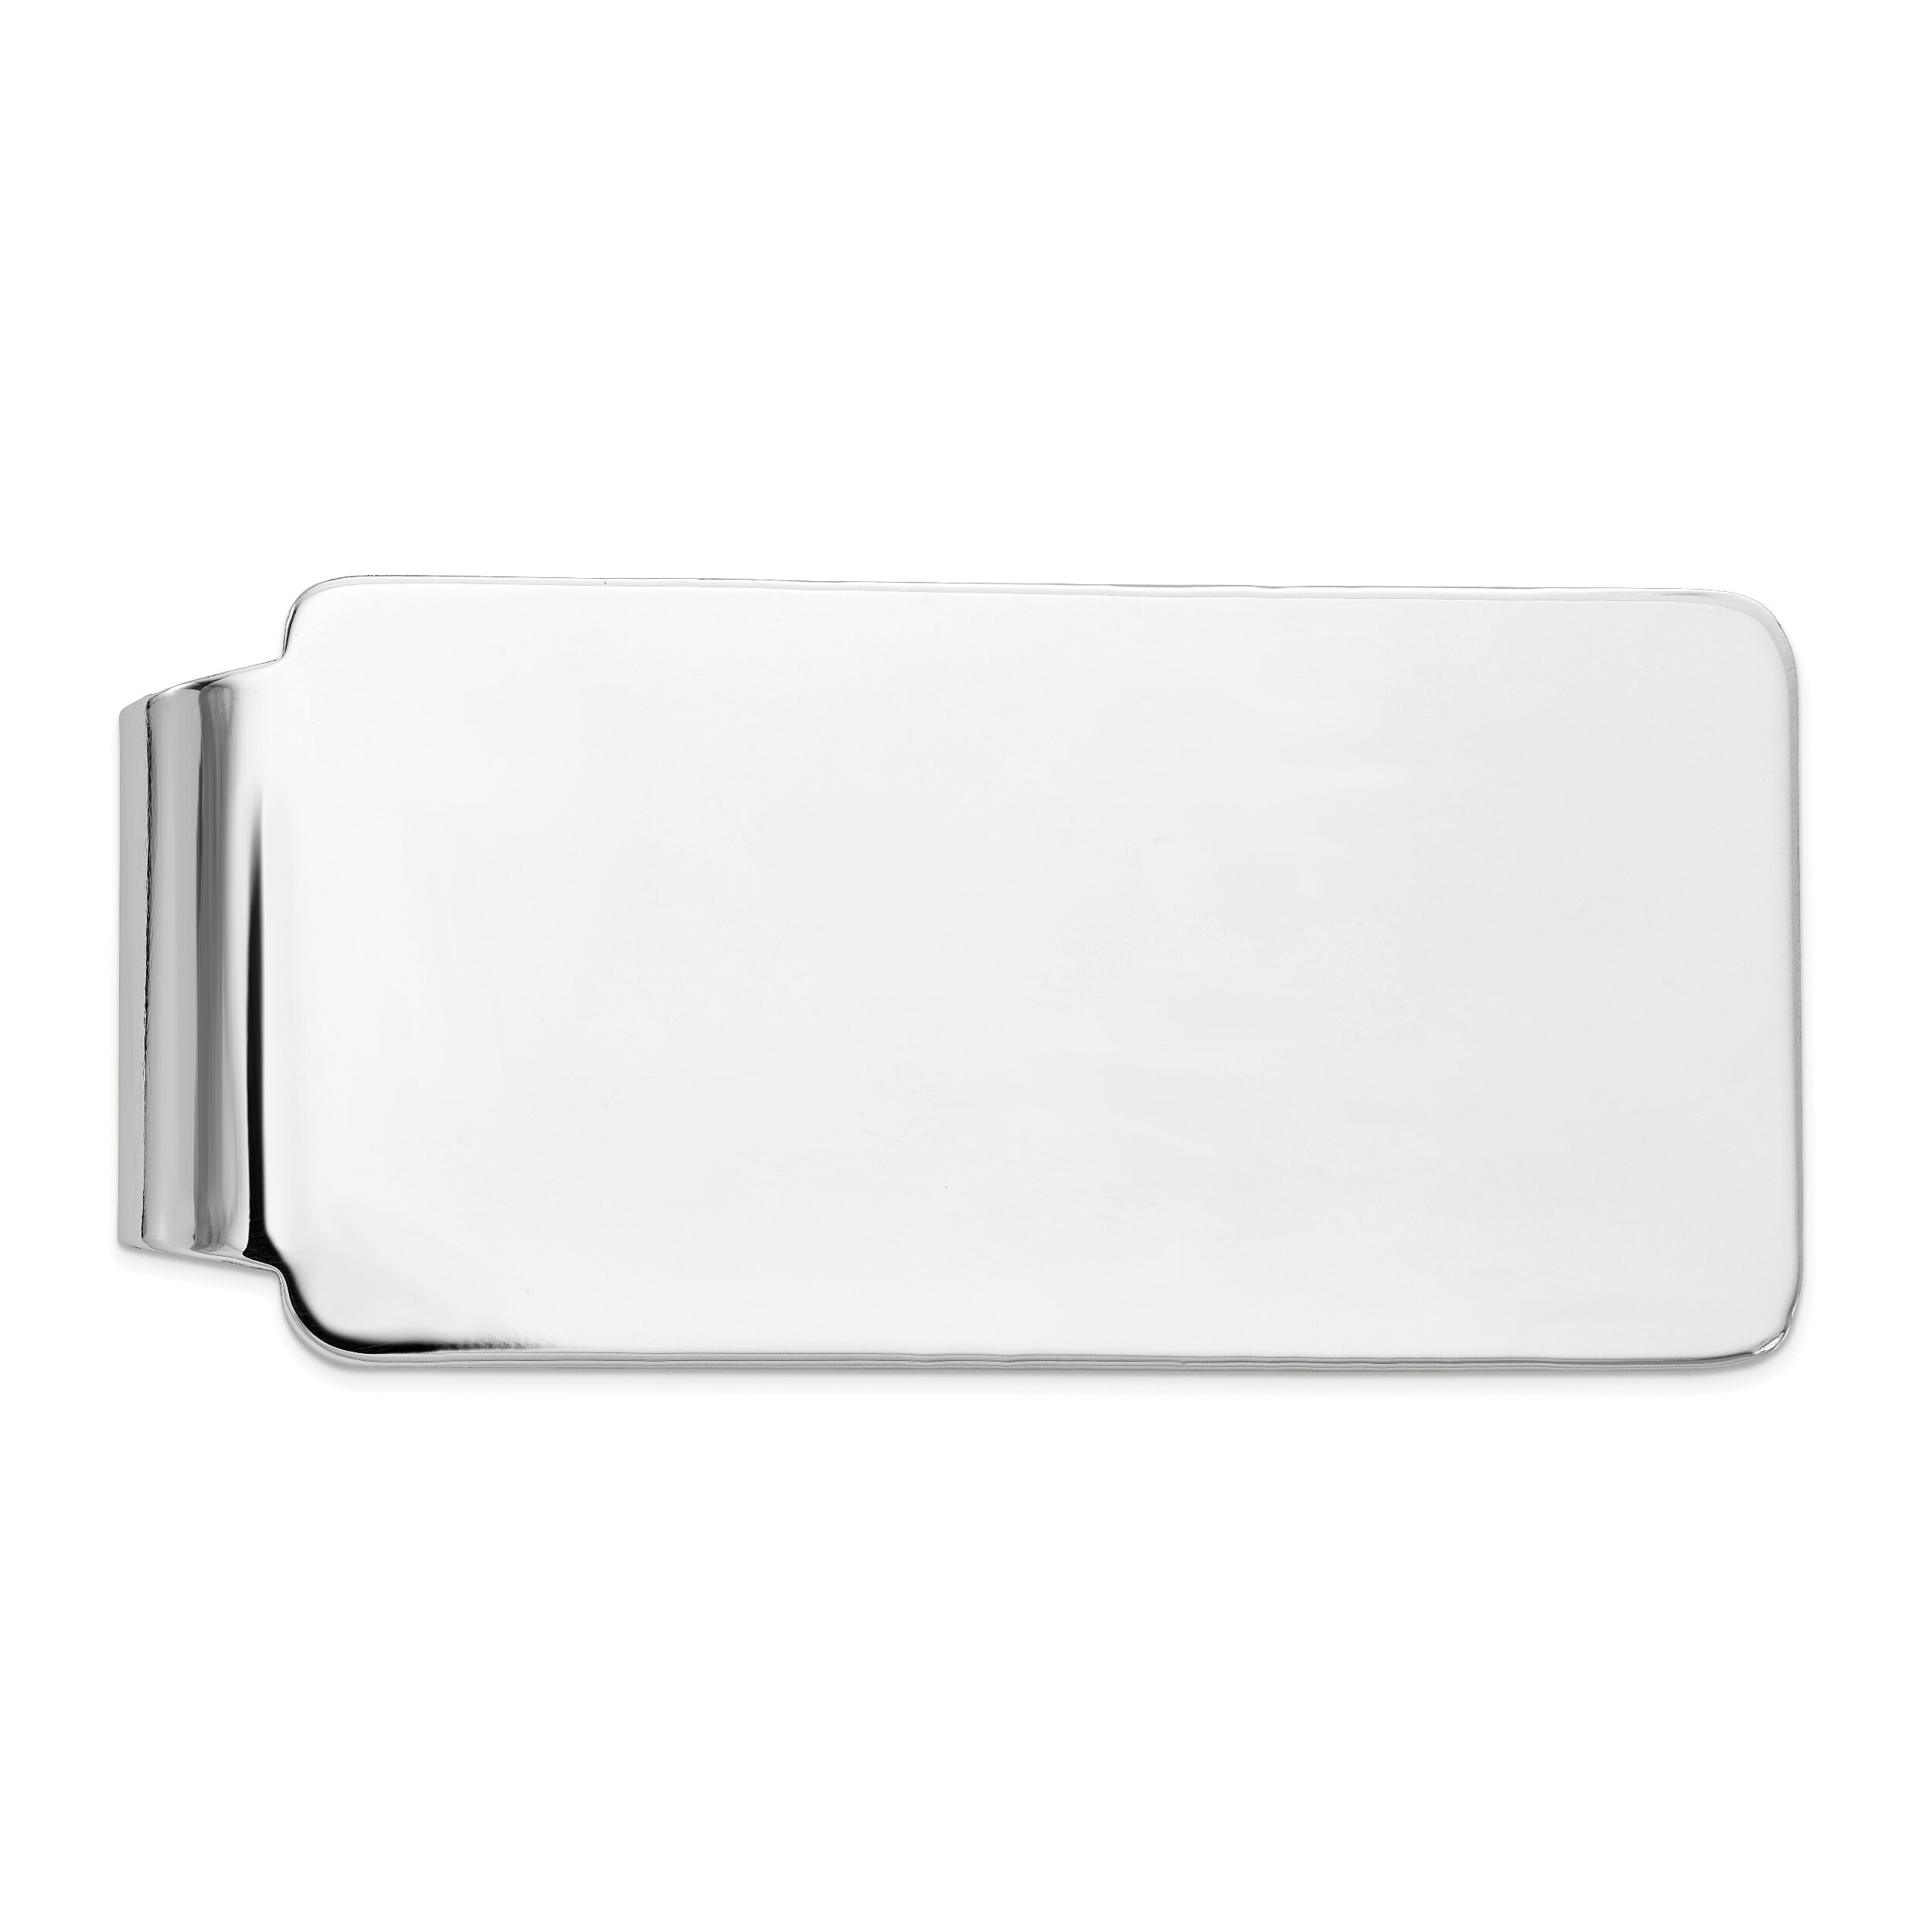 Findingking 14K White Gold Engravable Money Clip Mens Jewelry